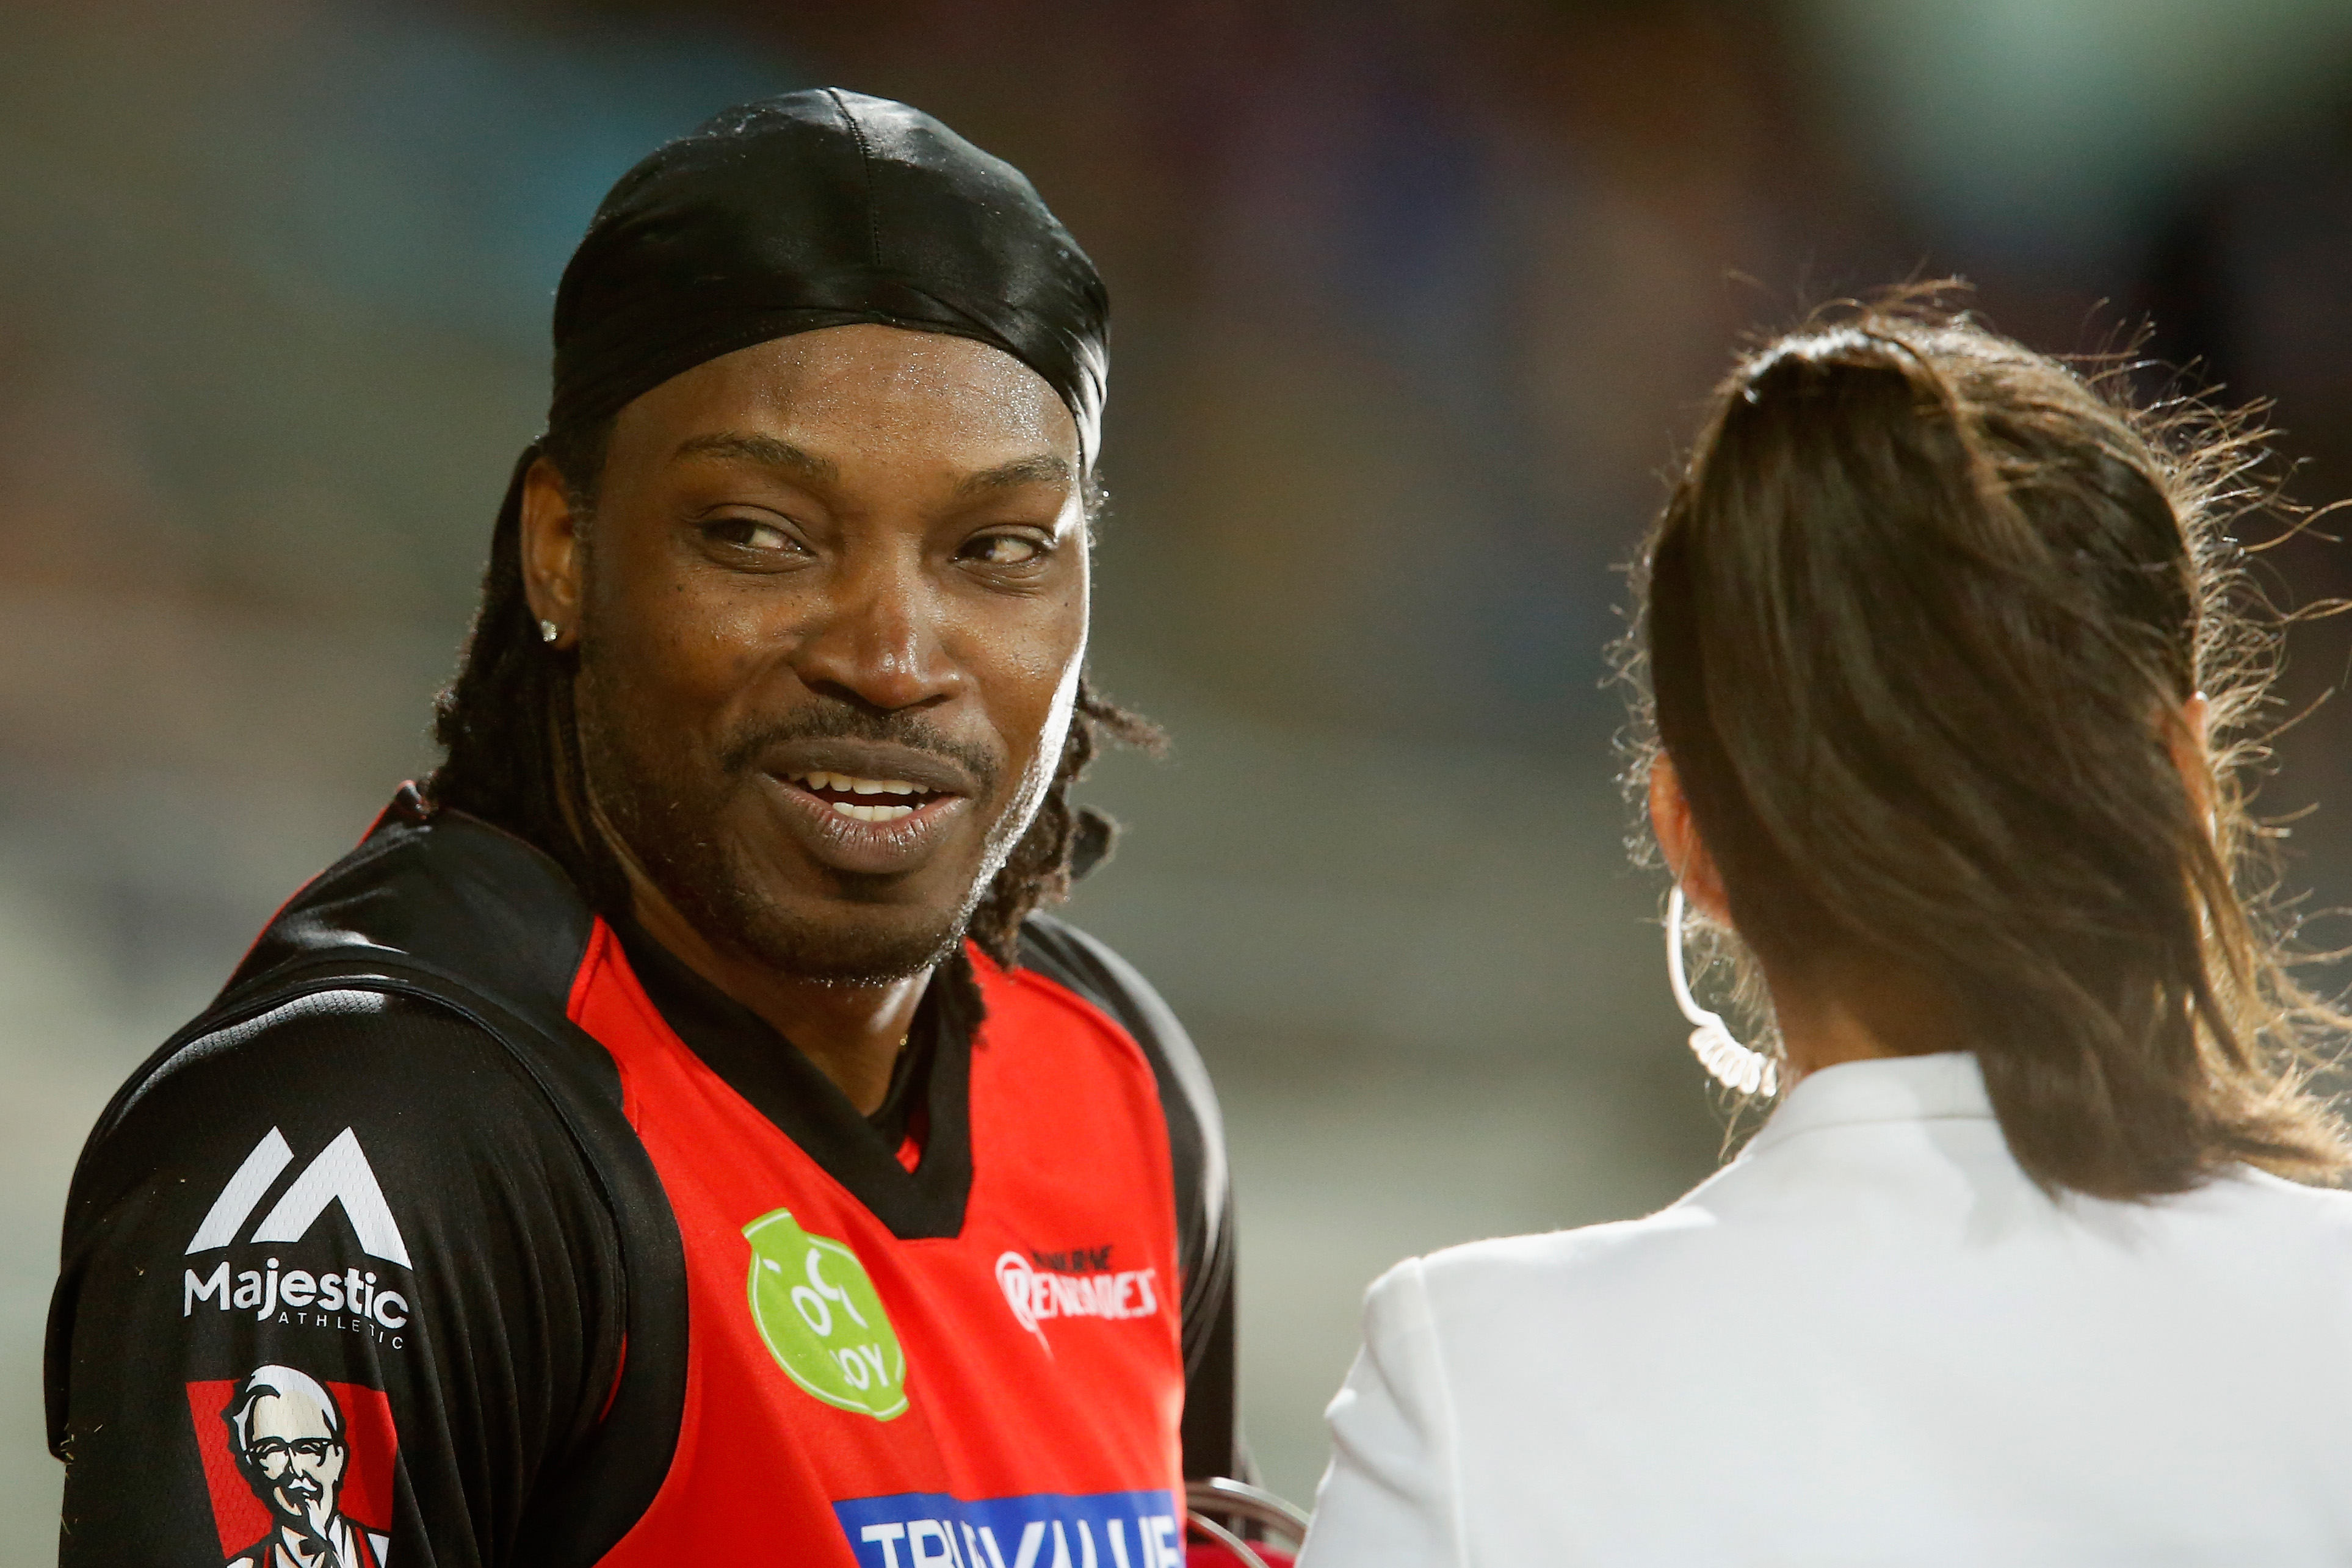 Chris Gayle of the Melbourne Renegades gives a TV interview to Mel Mclaughlin during the Big Bash League match between the Hobart Hurricanes and the Melbourne Renegades at Blundstone Arena in Hobart, Australia, on Jan. 4, 2016 (Darrian Traynor—Getty Images)